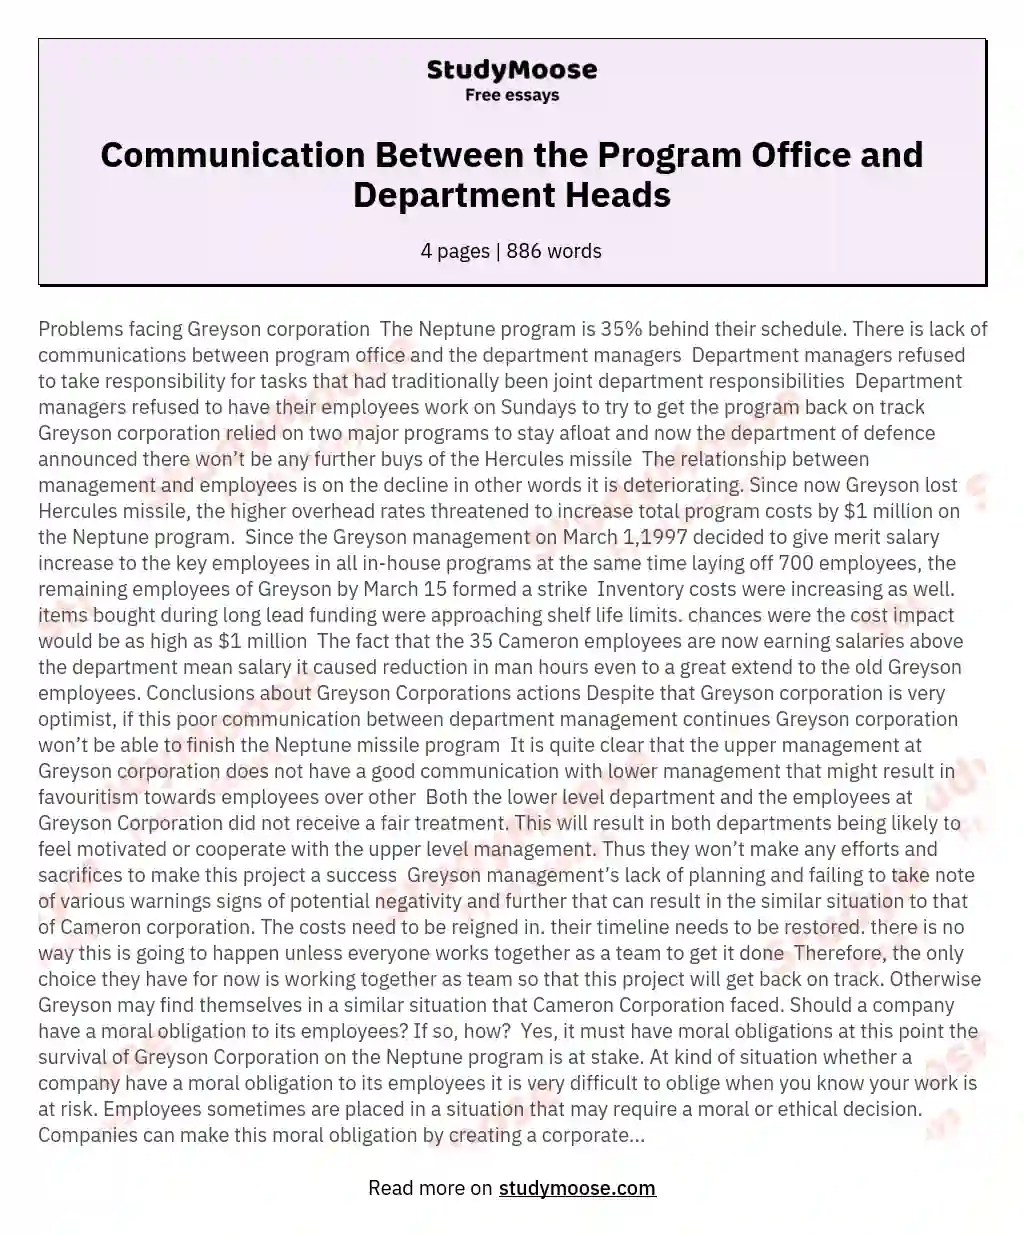 Communication Between the Program Office and Department Heads essay